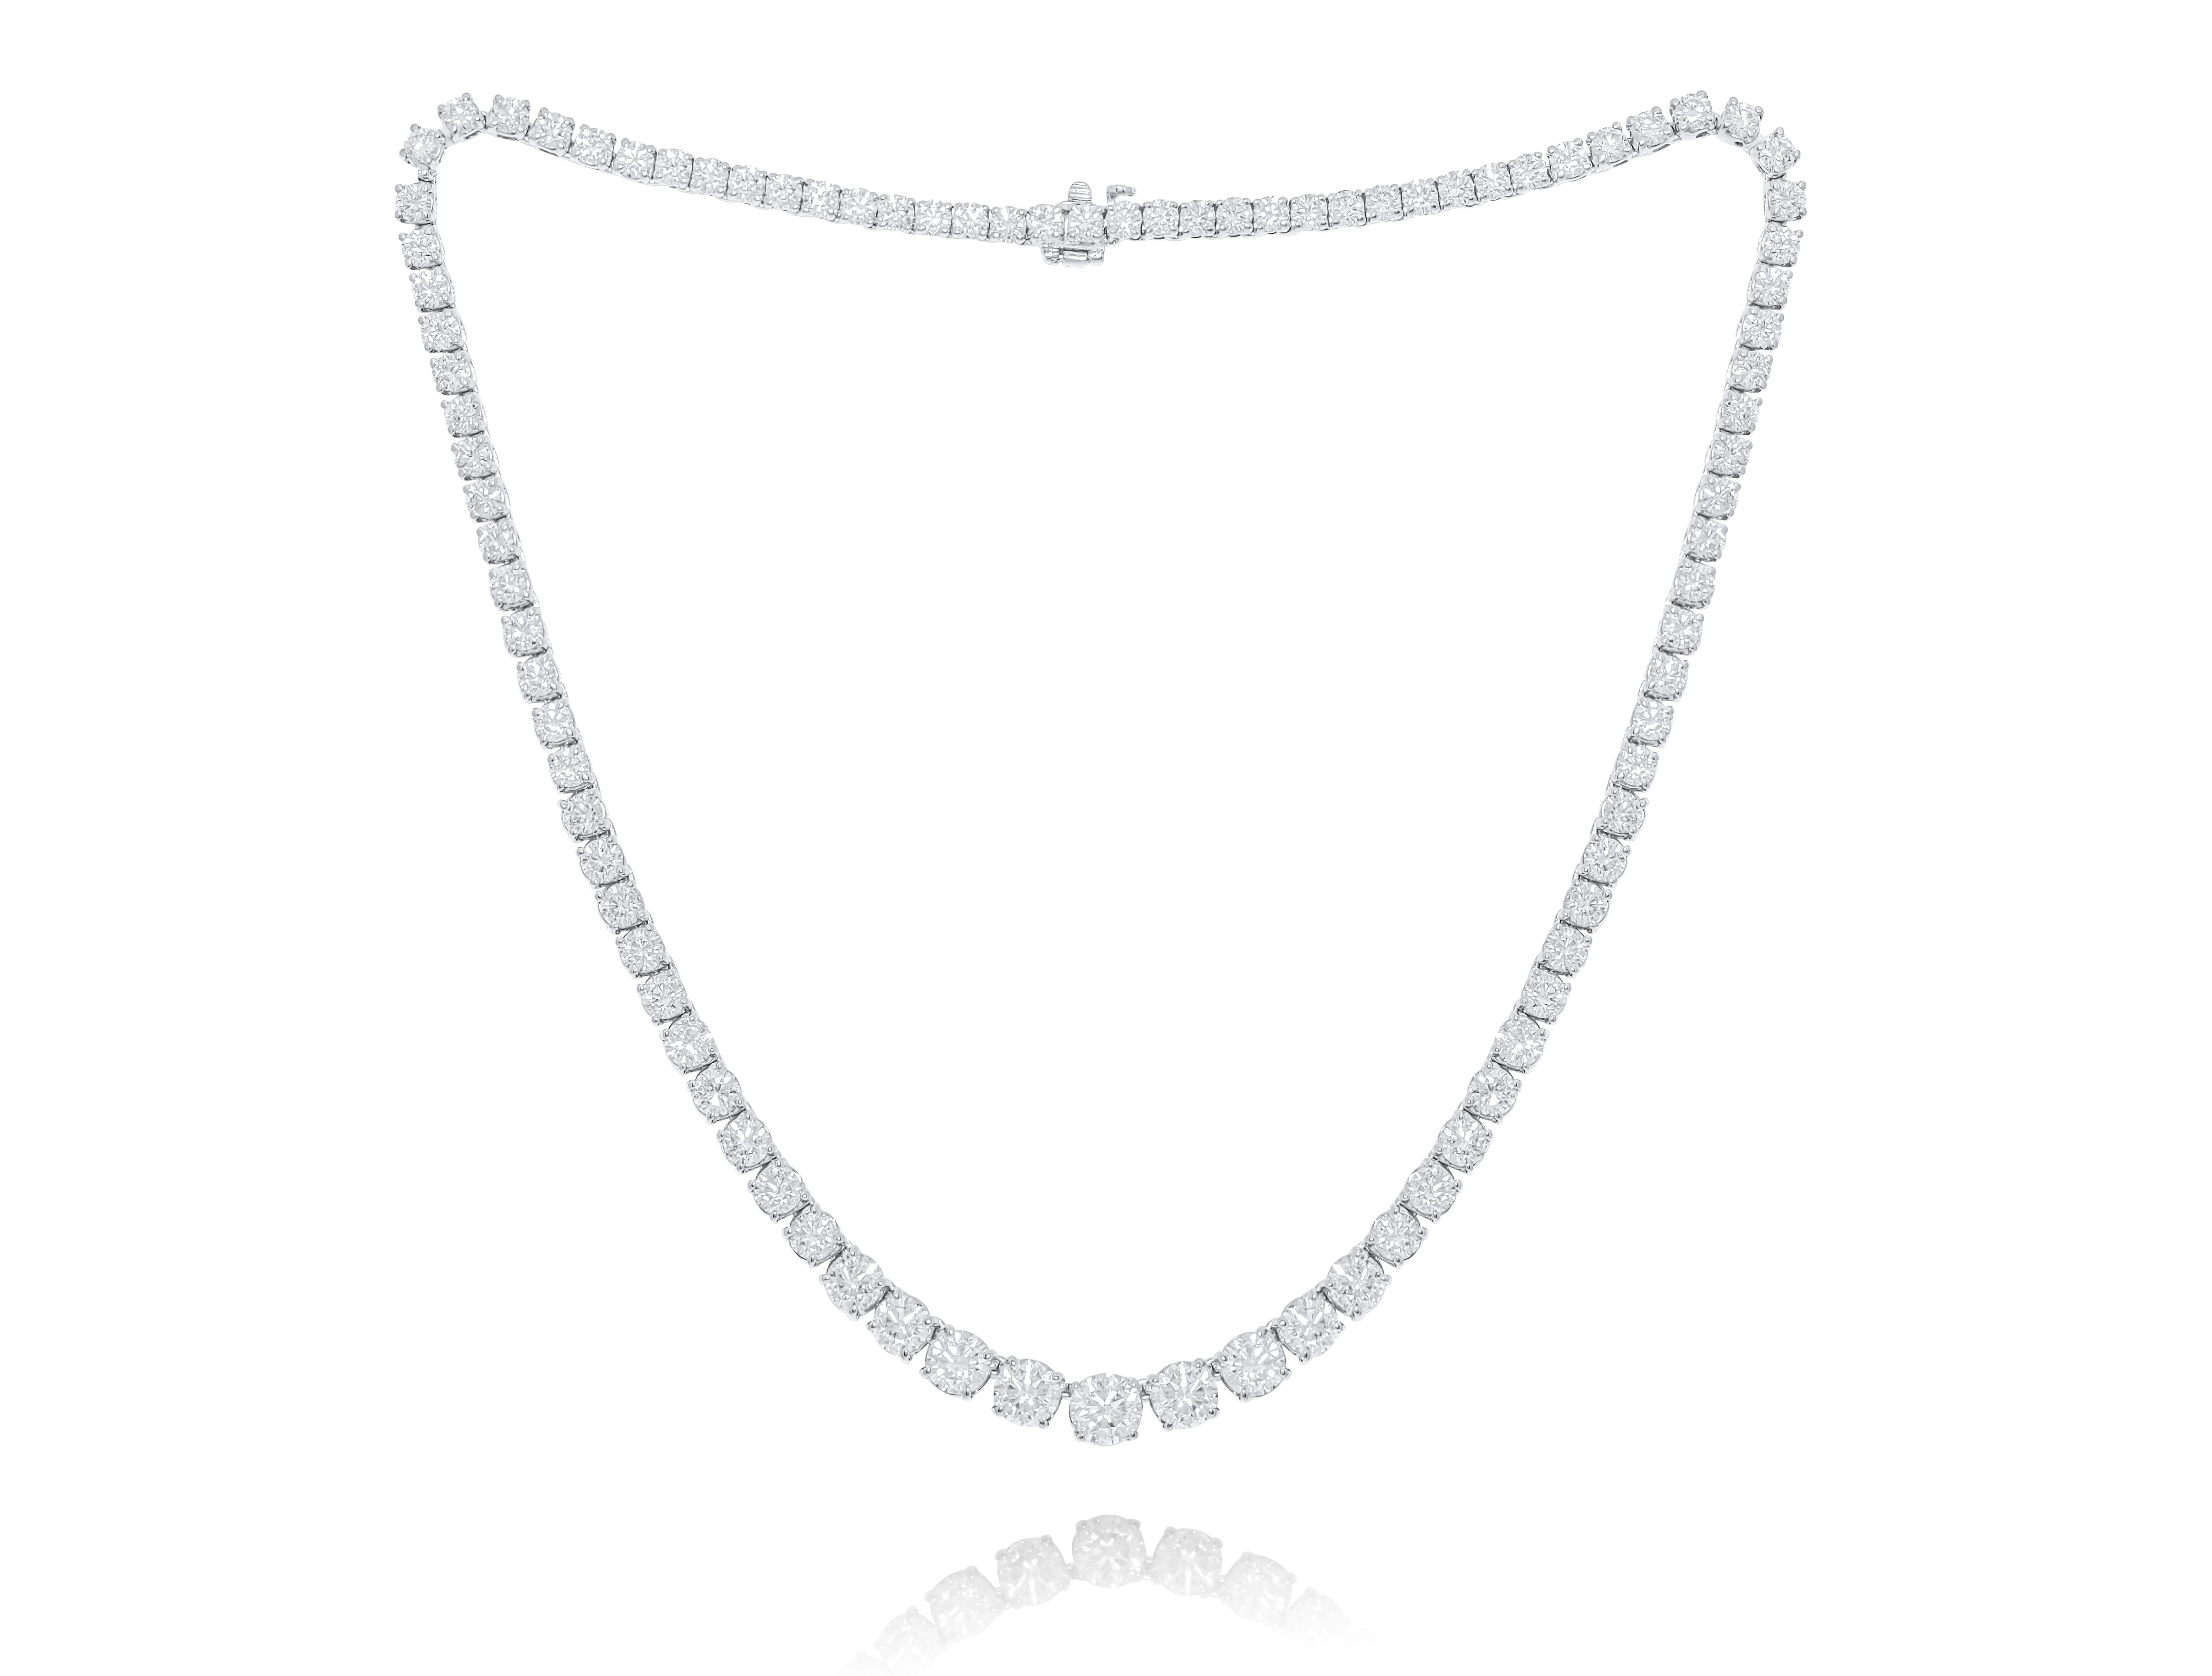  Custom 14k white gold graduated tennis necklace  20.00 cts round brilliant diamonds 93 stones 0.21 each set in a 4 prong setting FG color SI clarity. Excellent  cut. 
